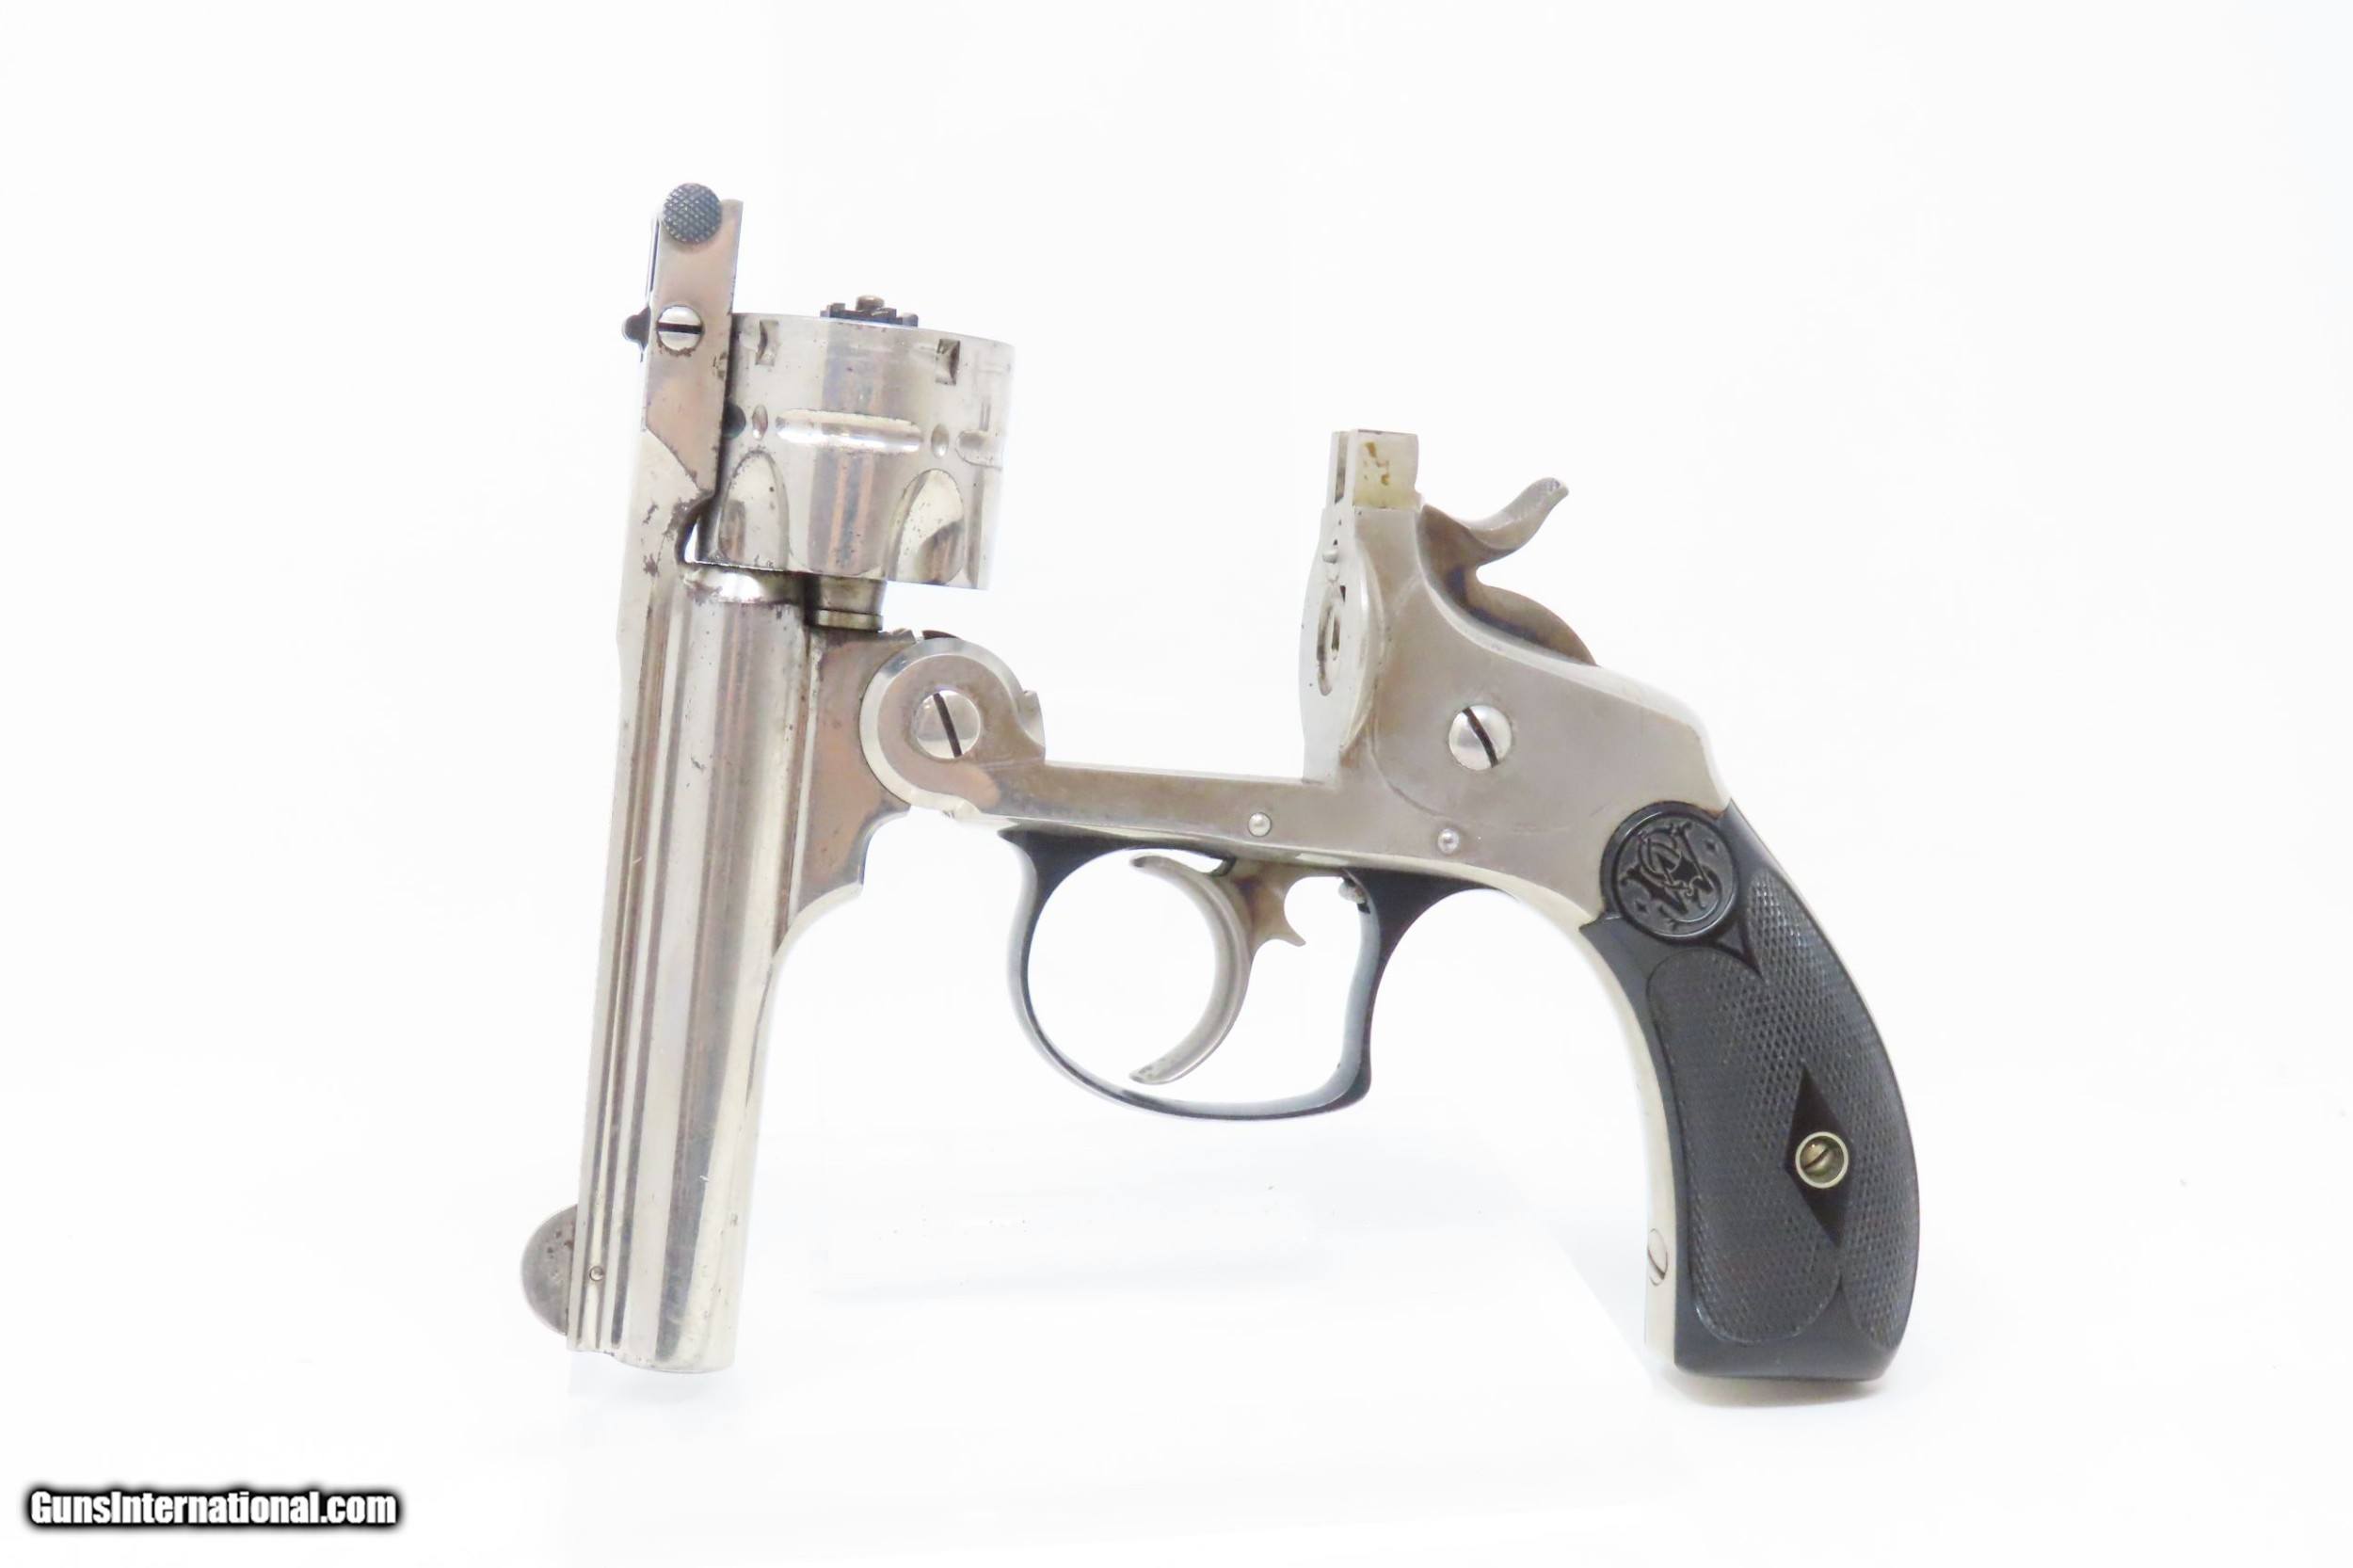 An S&W 32 Double Action Second Model Revolver 1800 - 1882